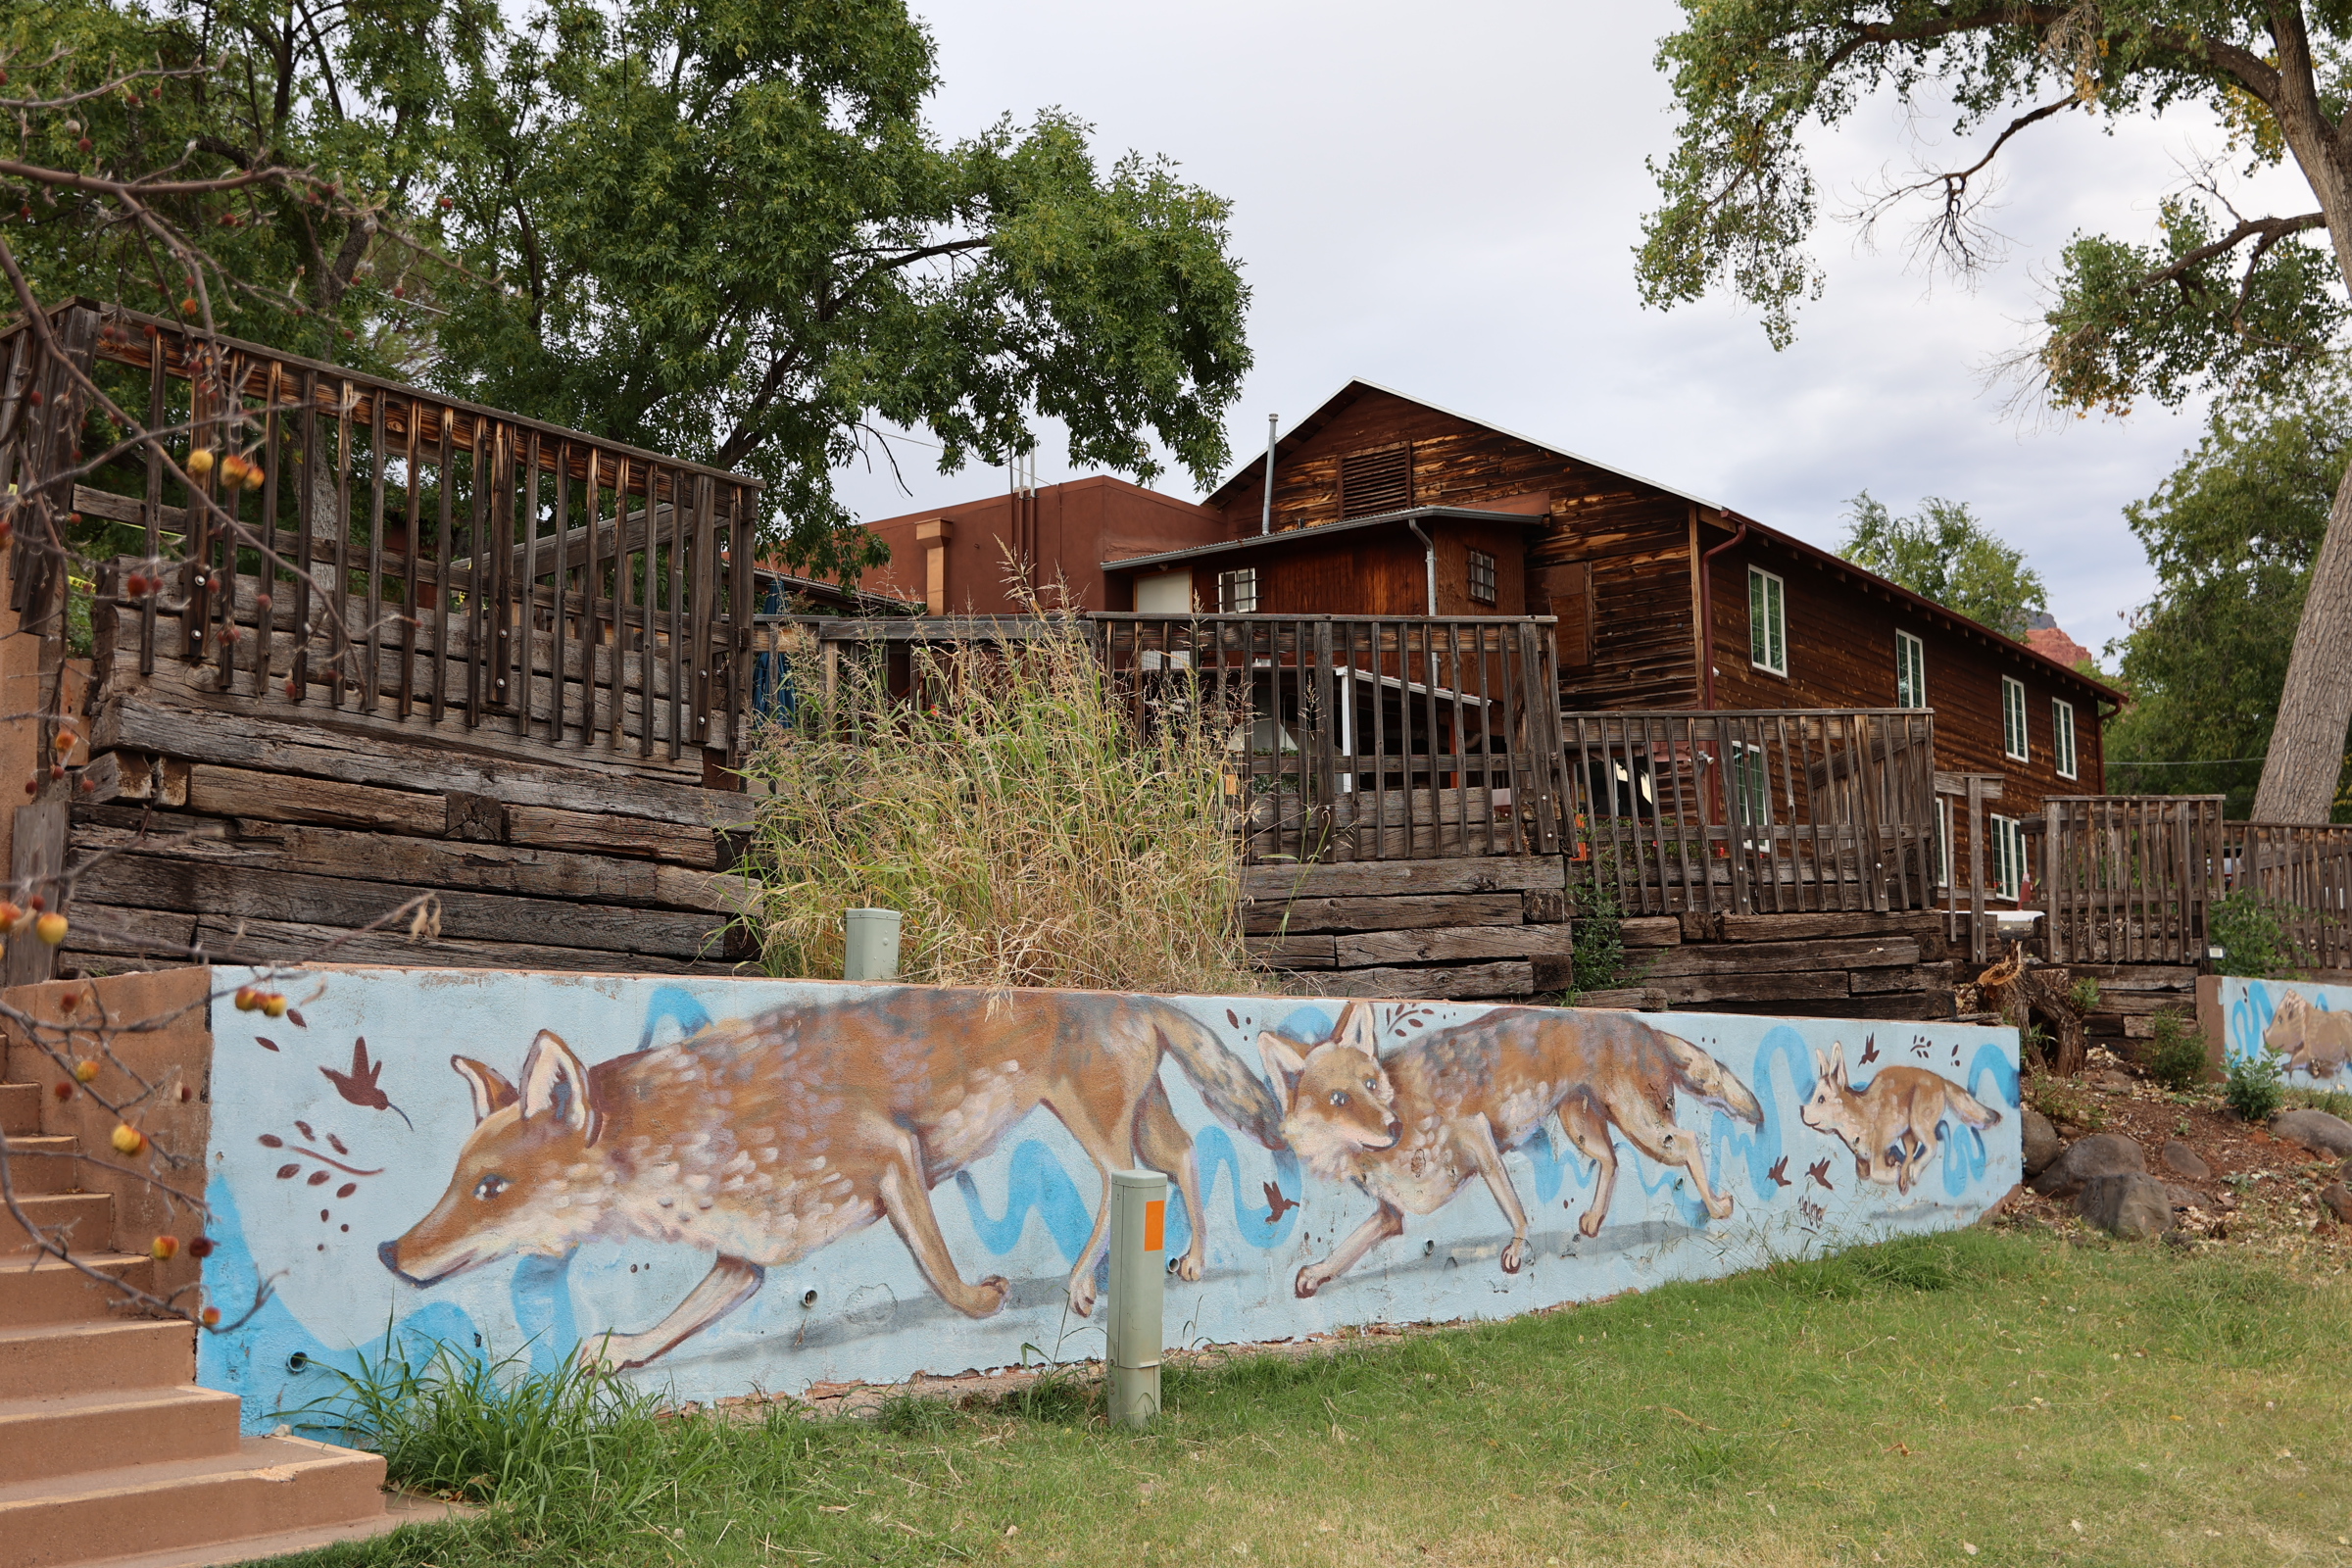 A mural of coyotes on a wall below a old building in Sedona